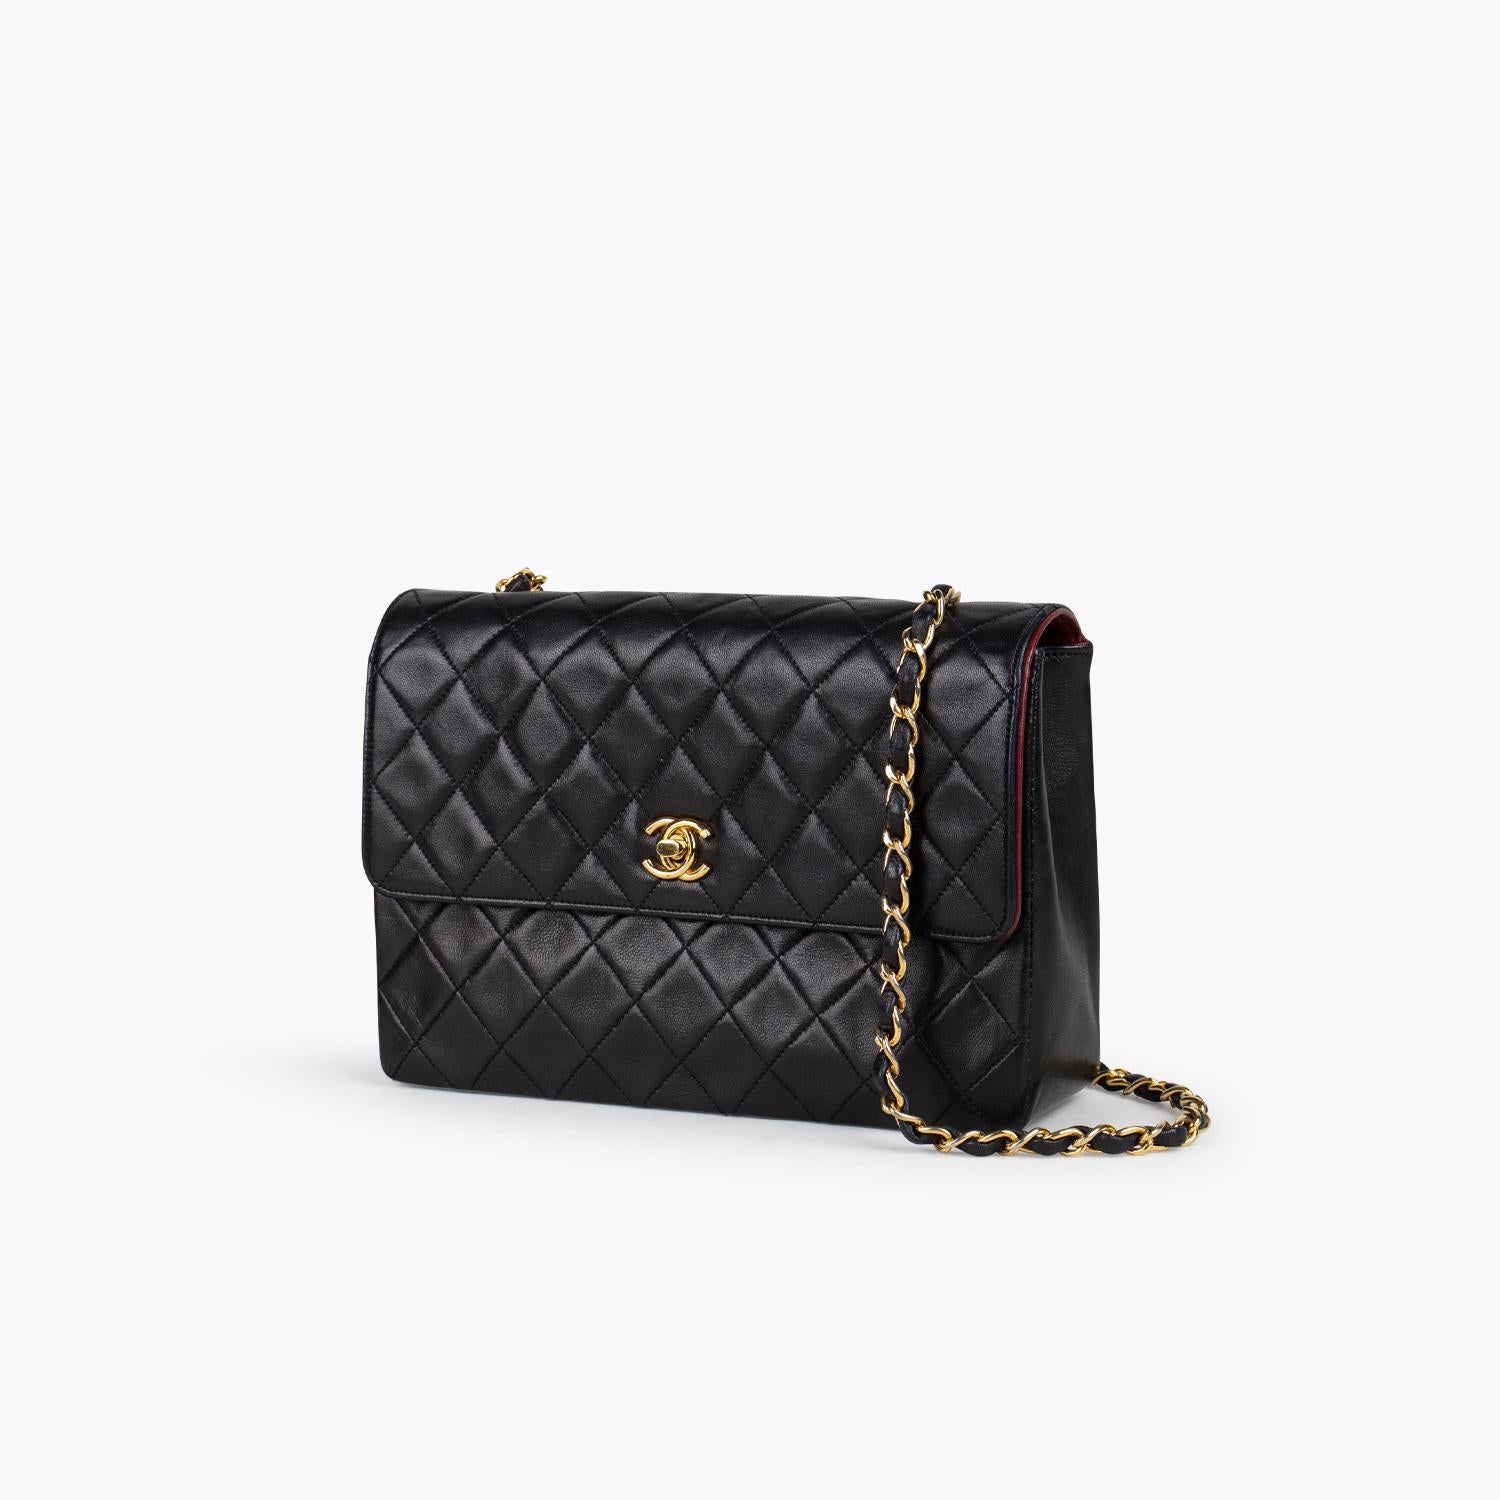 Black quilted leather Chanel Classic small single flap crossbody bag with

– Gold-tone hardware
– Chain-Link Shoulder Strap
– Burgundy leather lining
– Three interior compartments, single zip pocket at interior wall and CC turn-lock closure at front